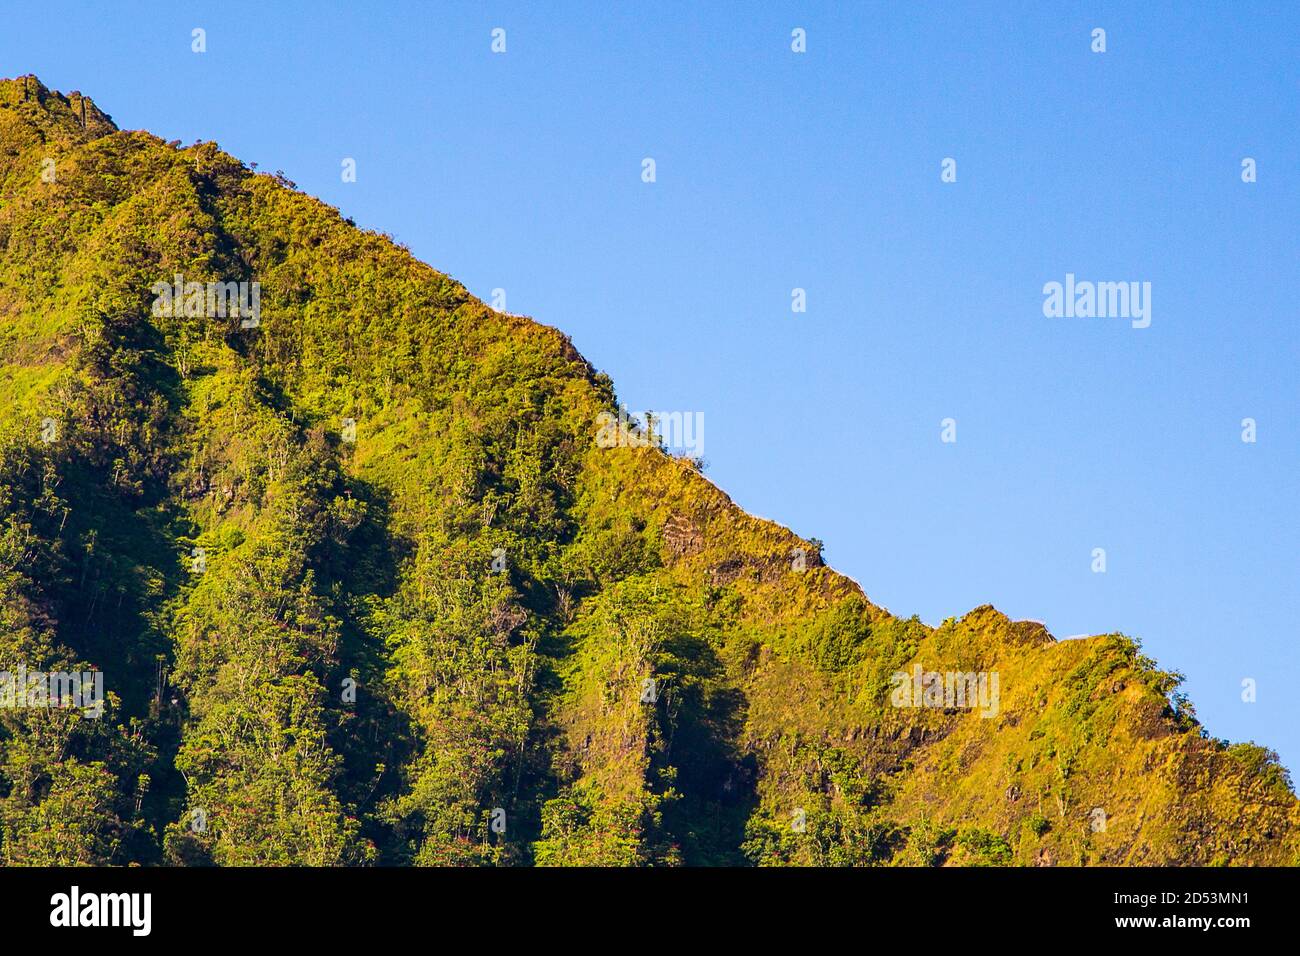 Beautiful view of the famous mountain landscape near the haiku stairs on a blue sky background Stock Photo